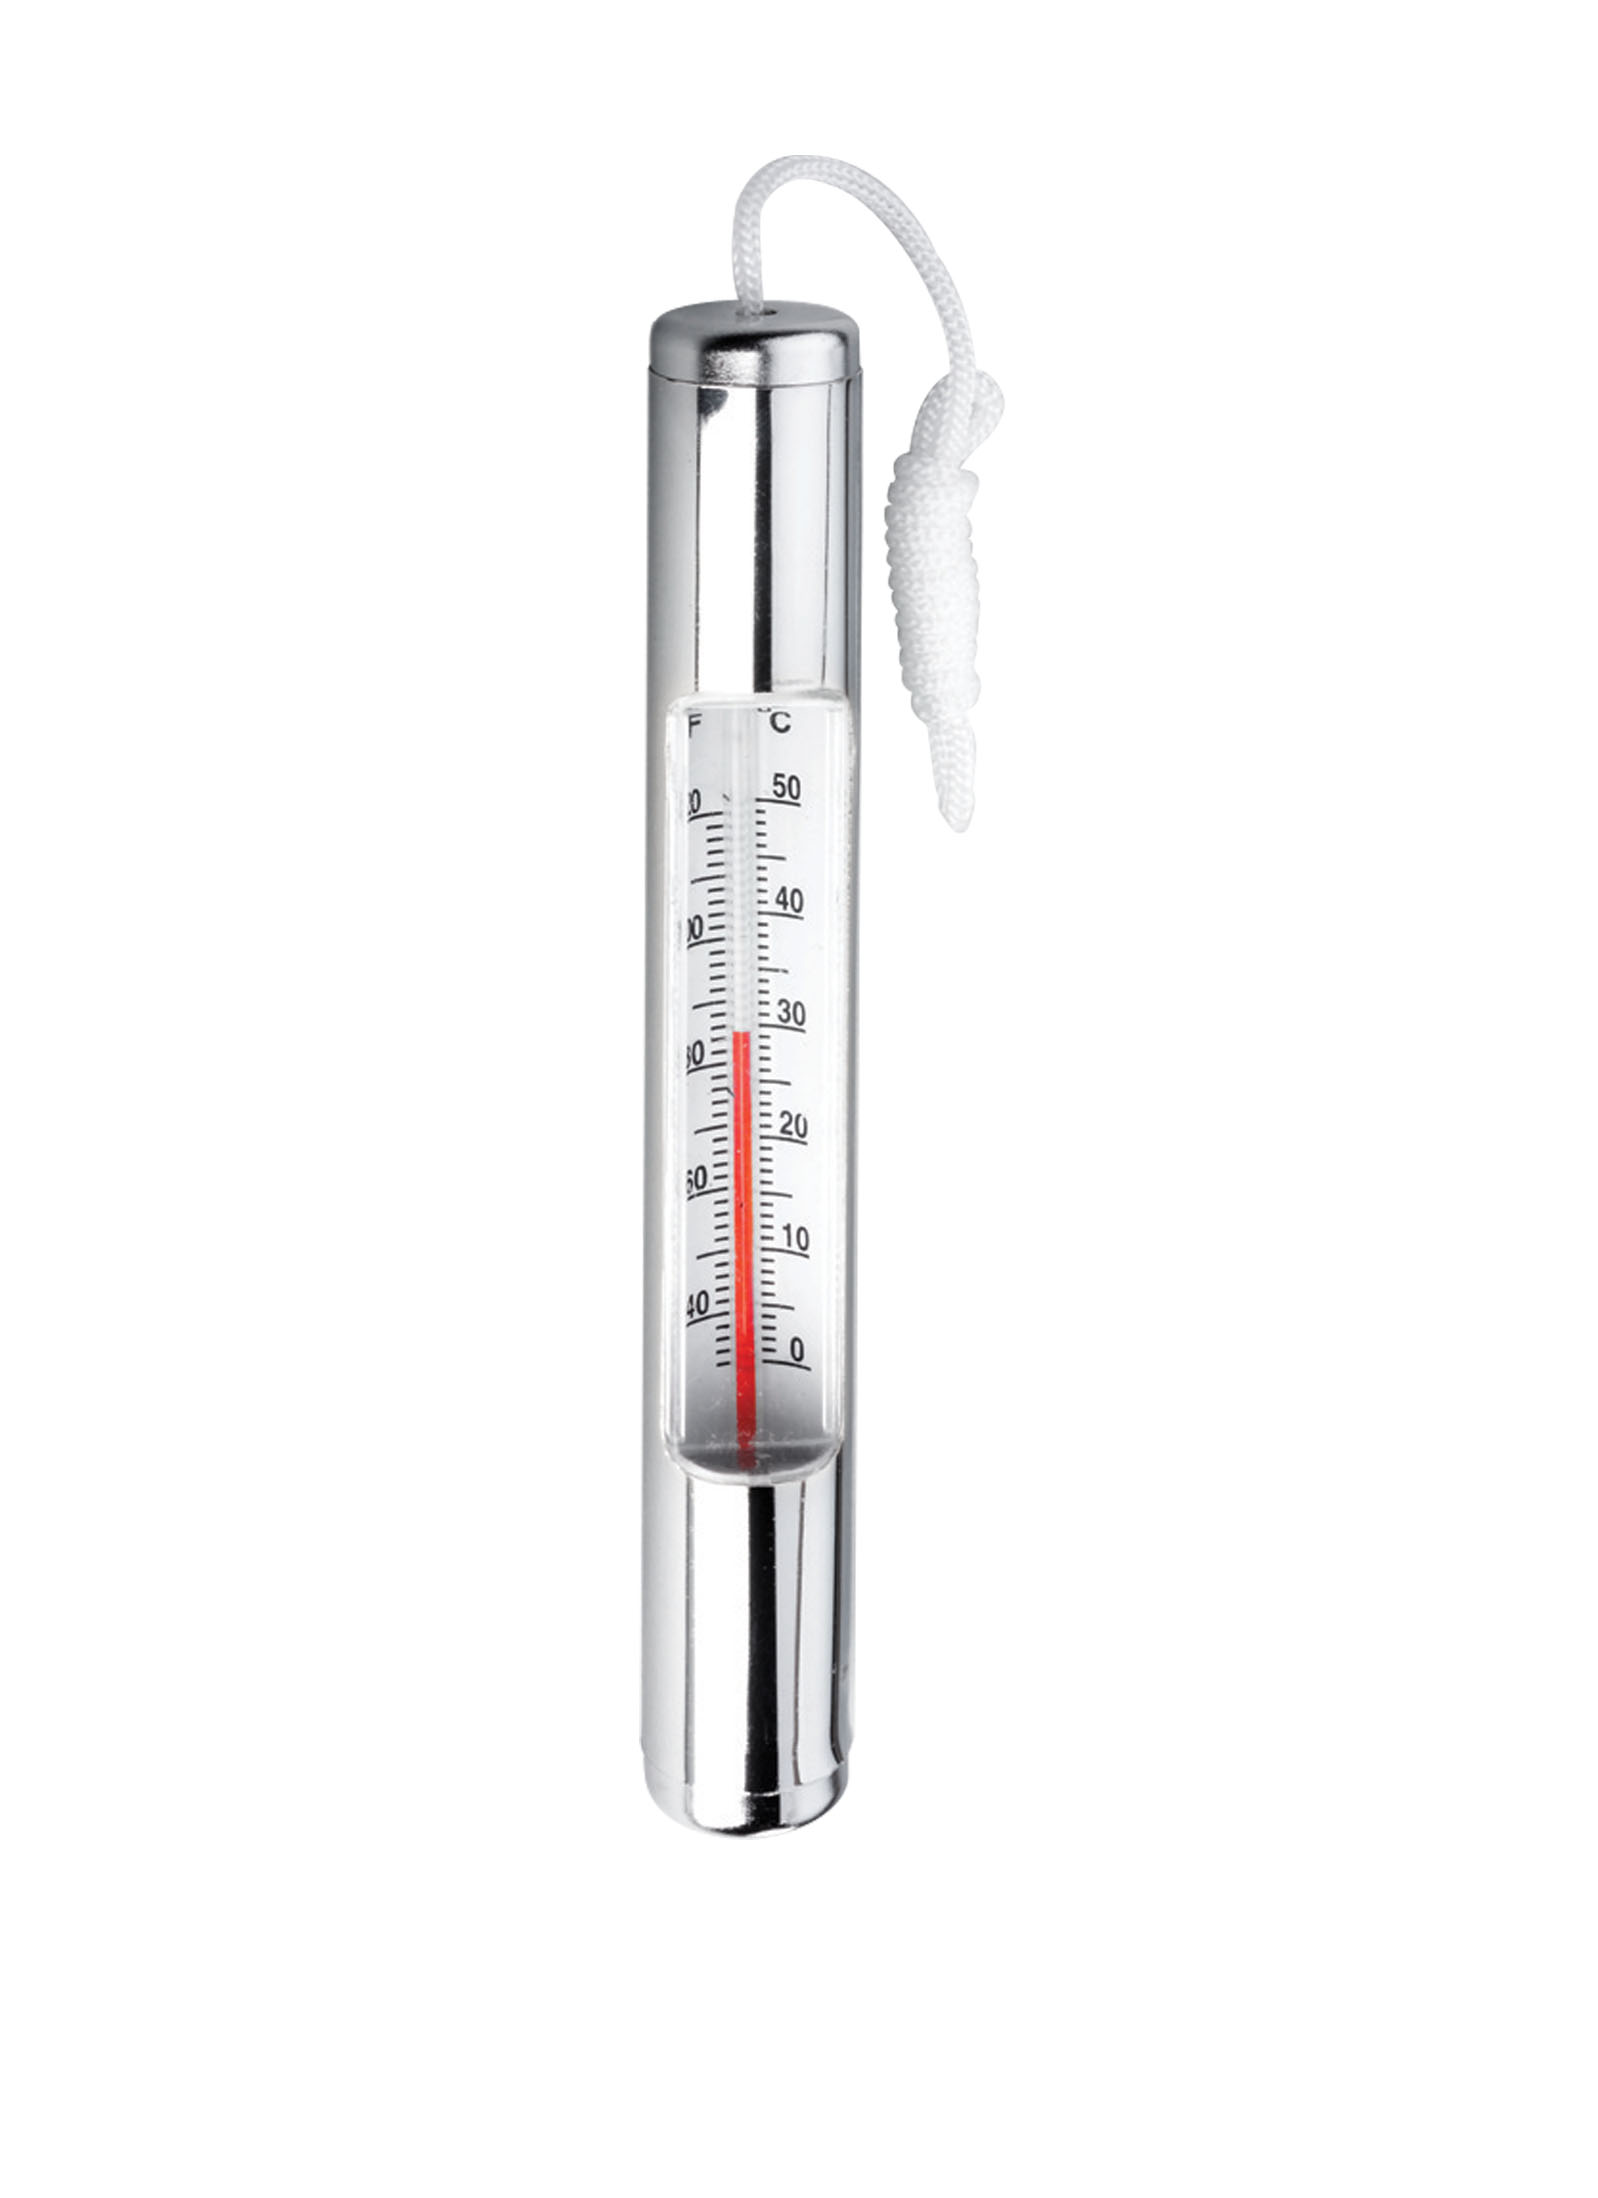 Thermometer Chrome Plated 150025PT - MAINTENANCE EQUIPMENT